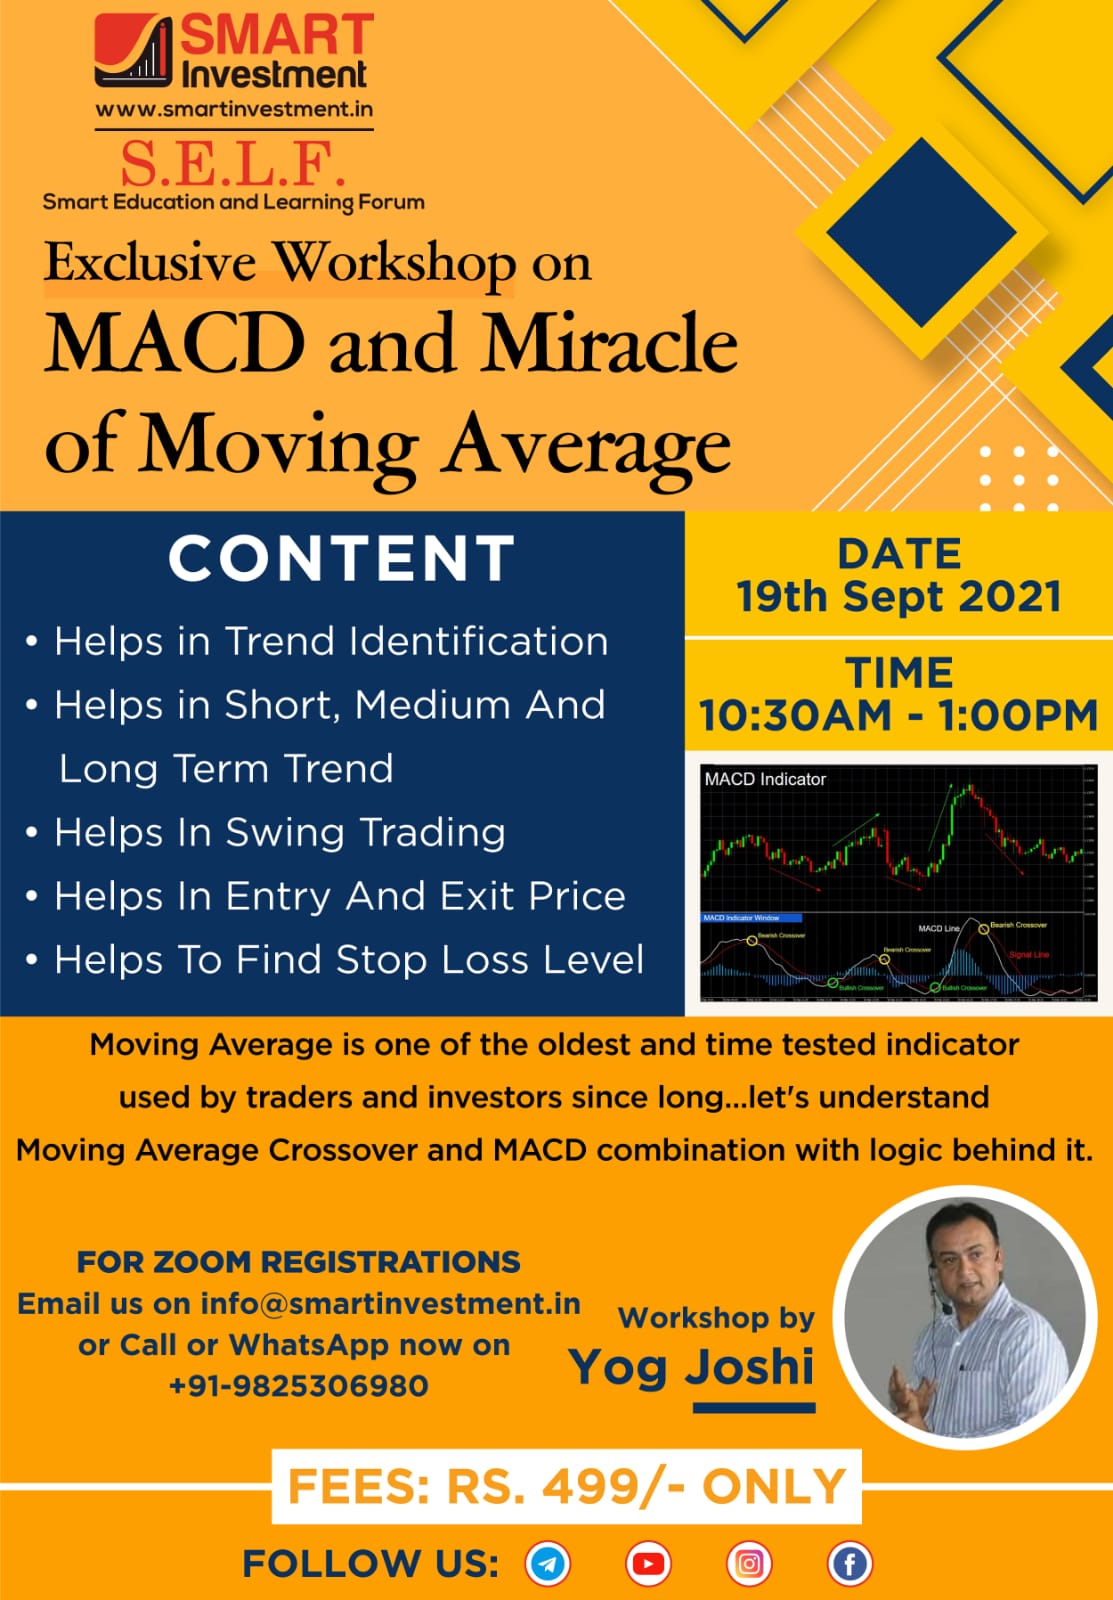 MACD and Miracle of Moving Average